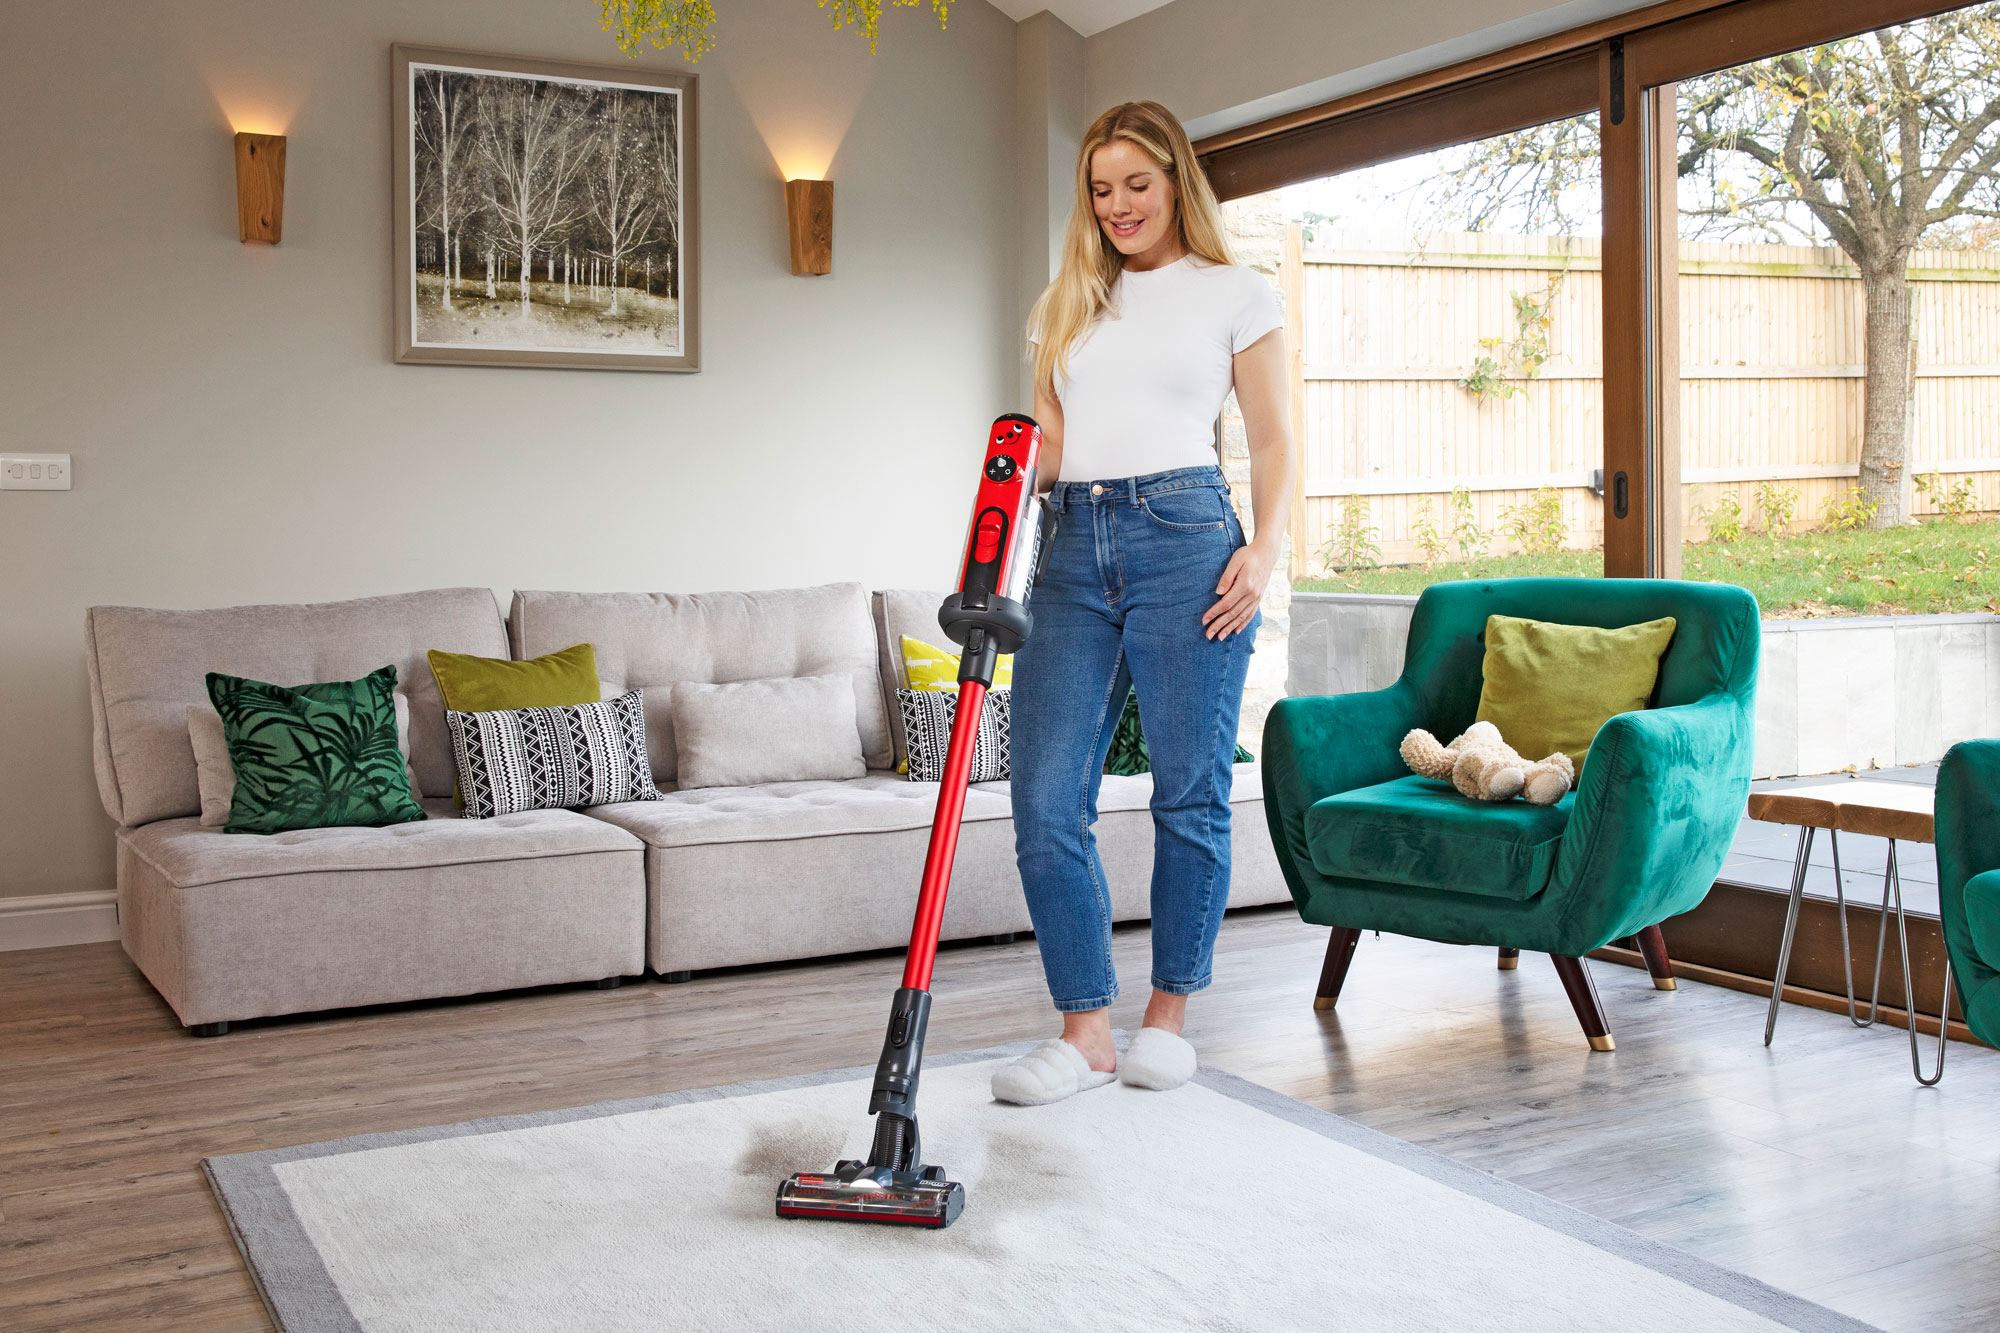 Why the British love Henry Hoover